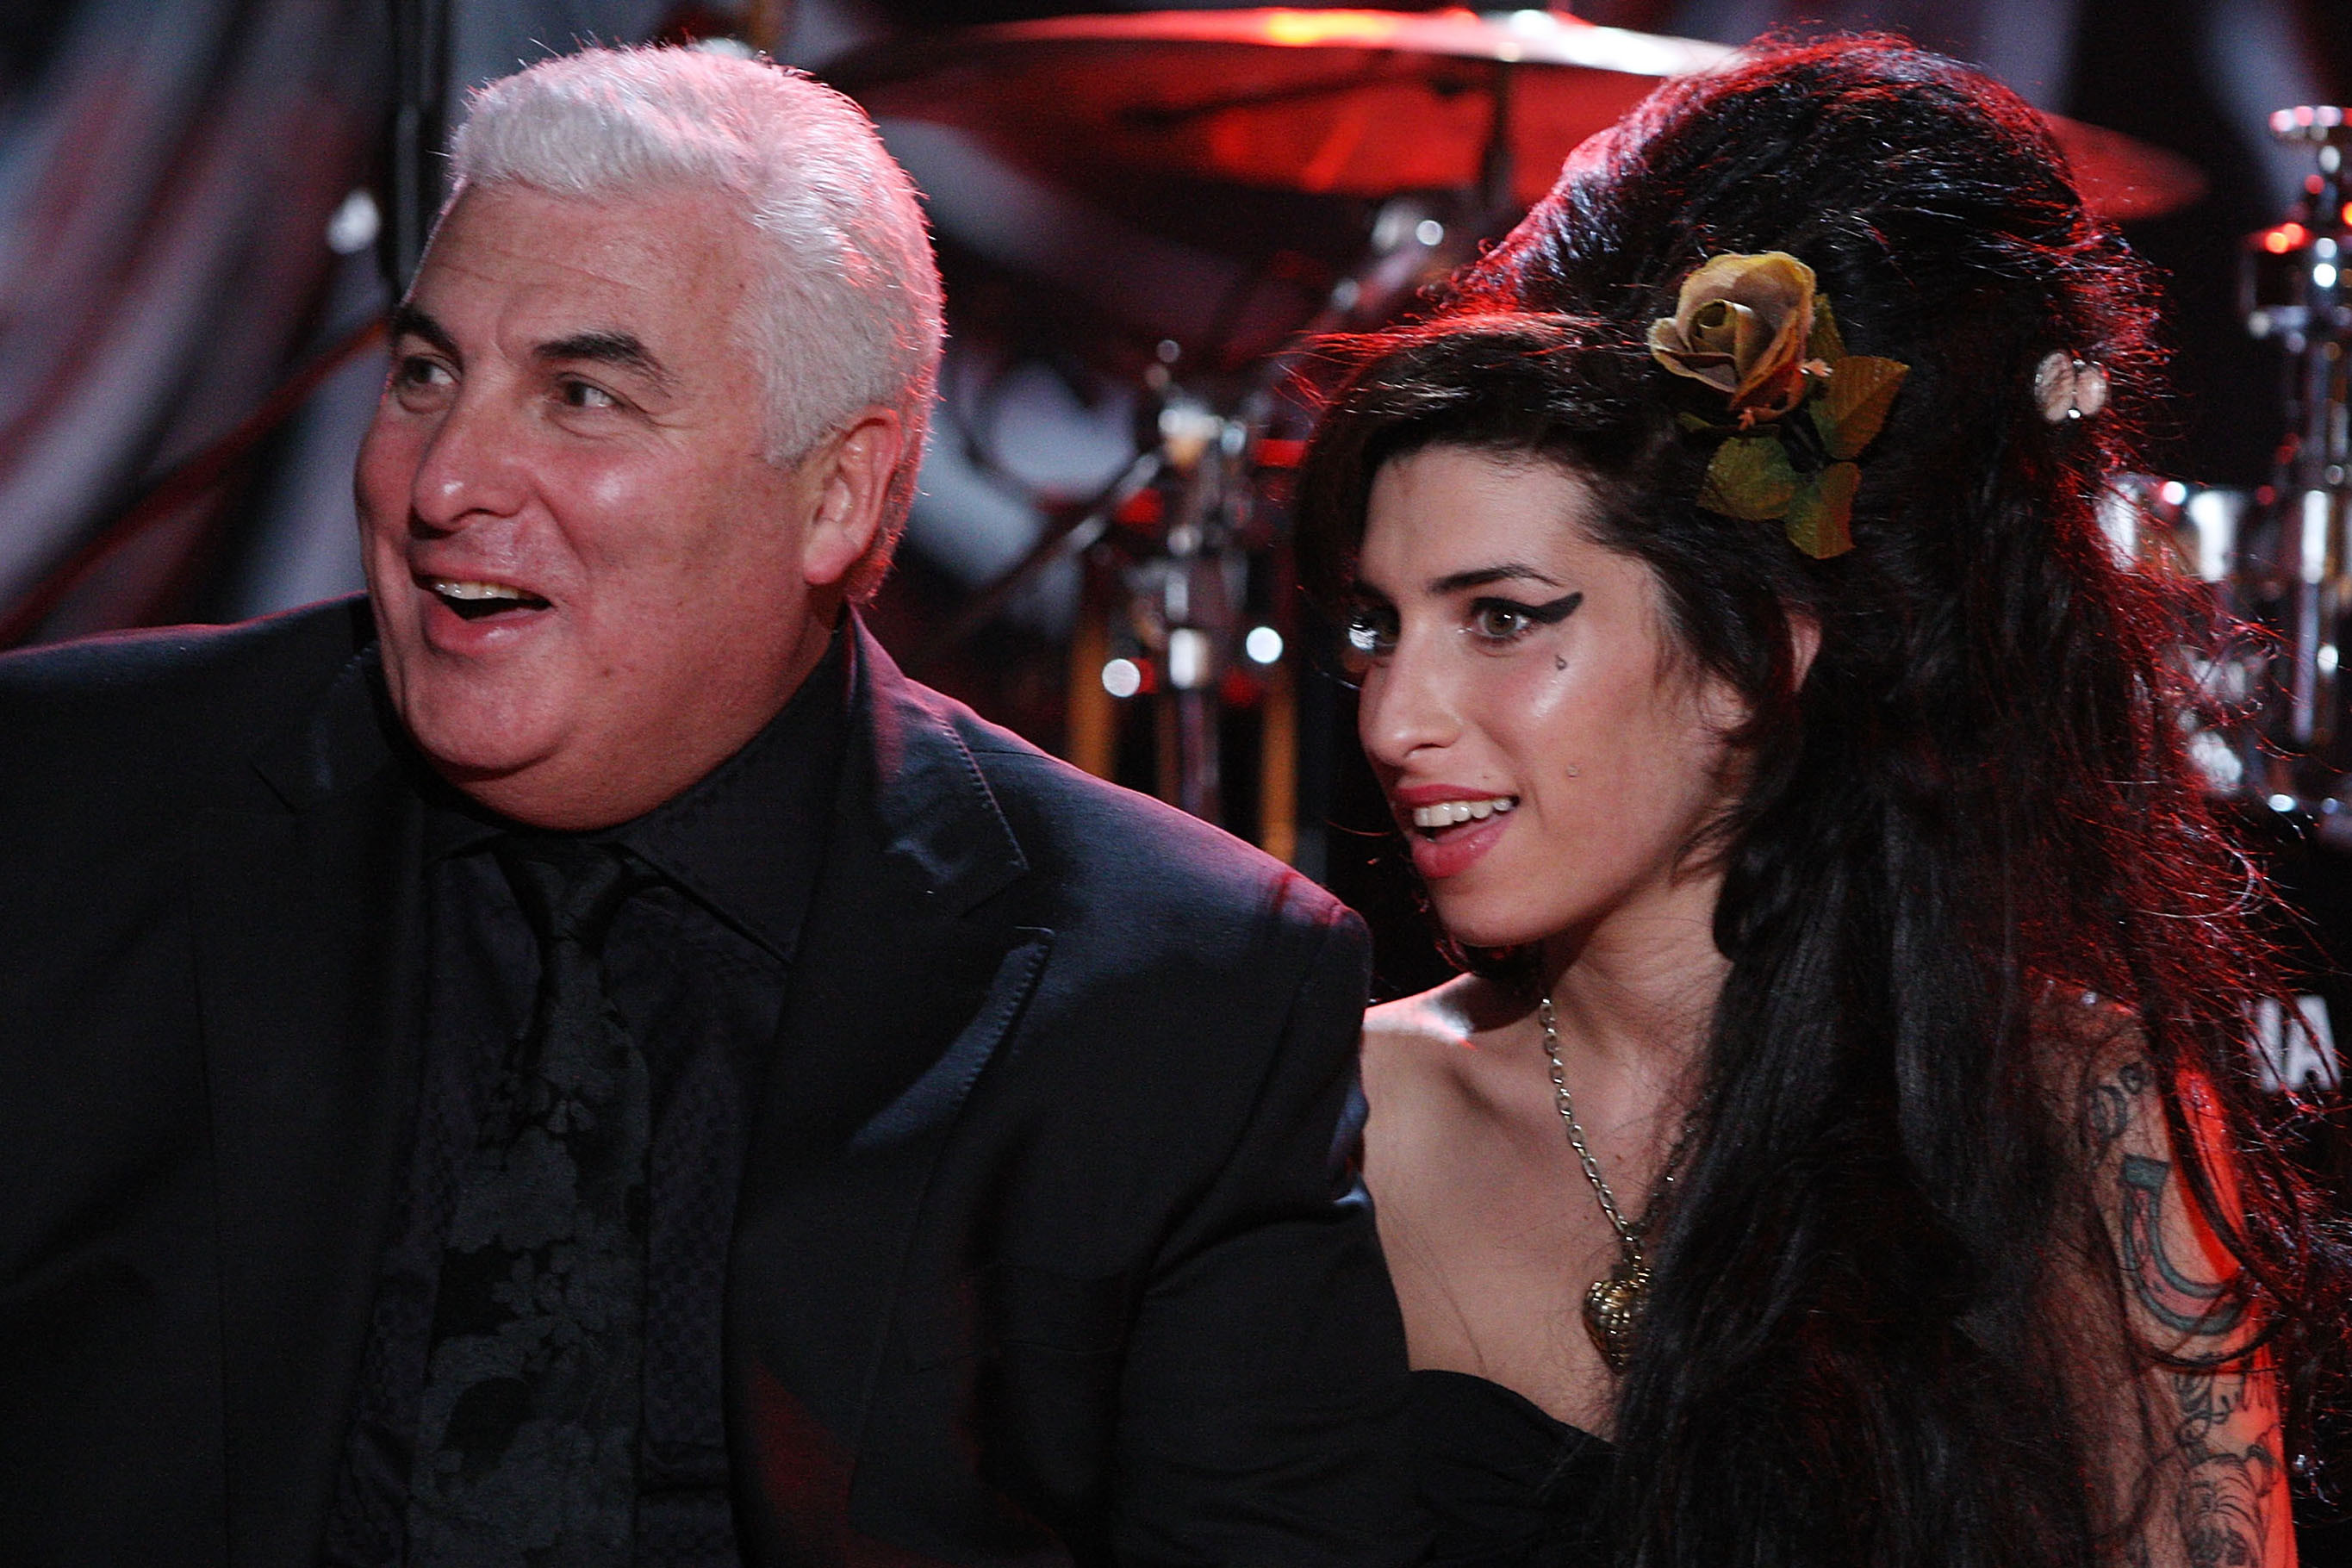 Amy Winehouse's father continues to advocate for the hologram tour, much to fans' dismay. (Image via Page Six)